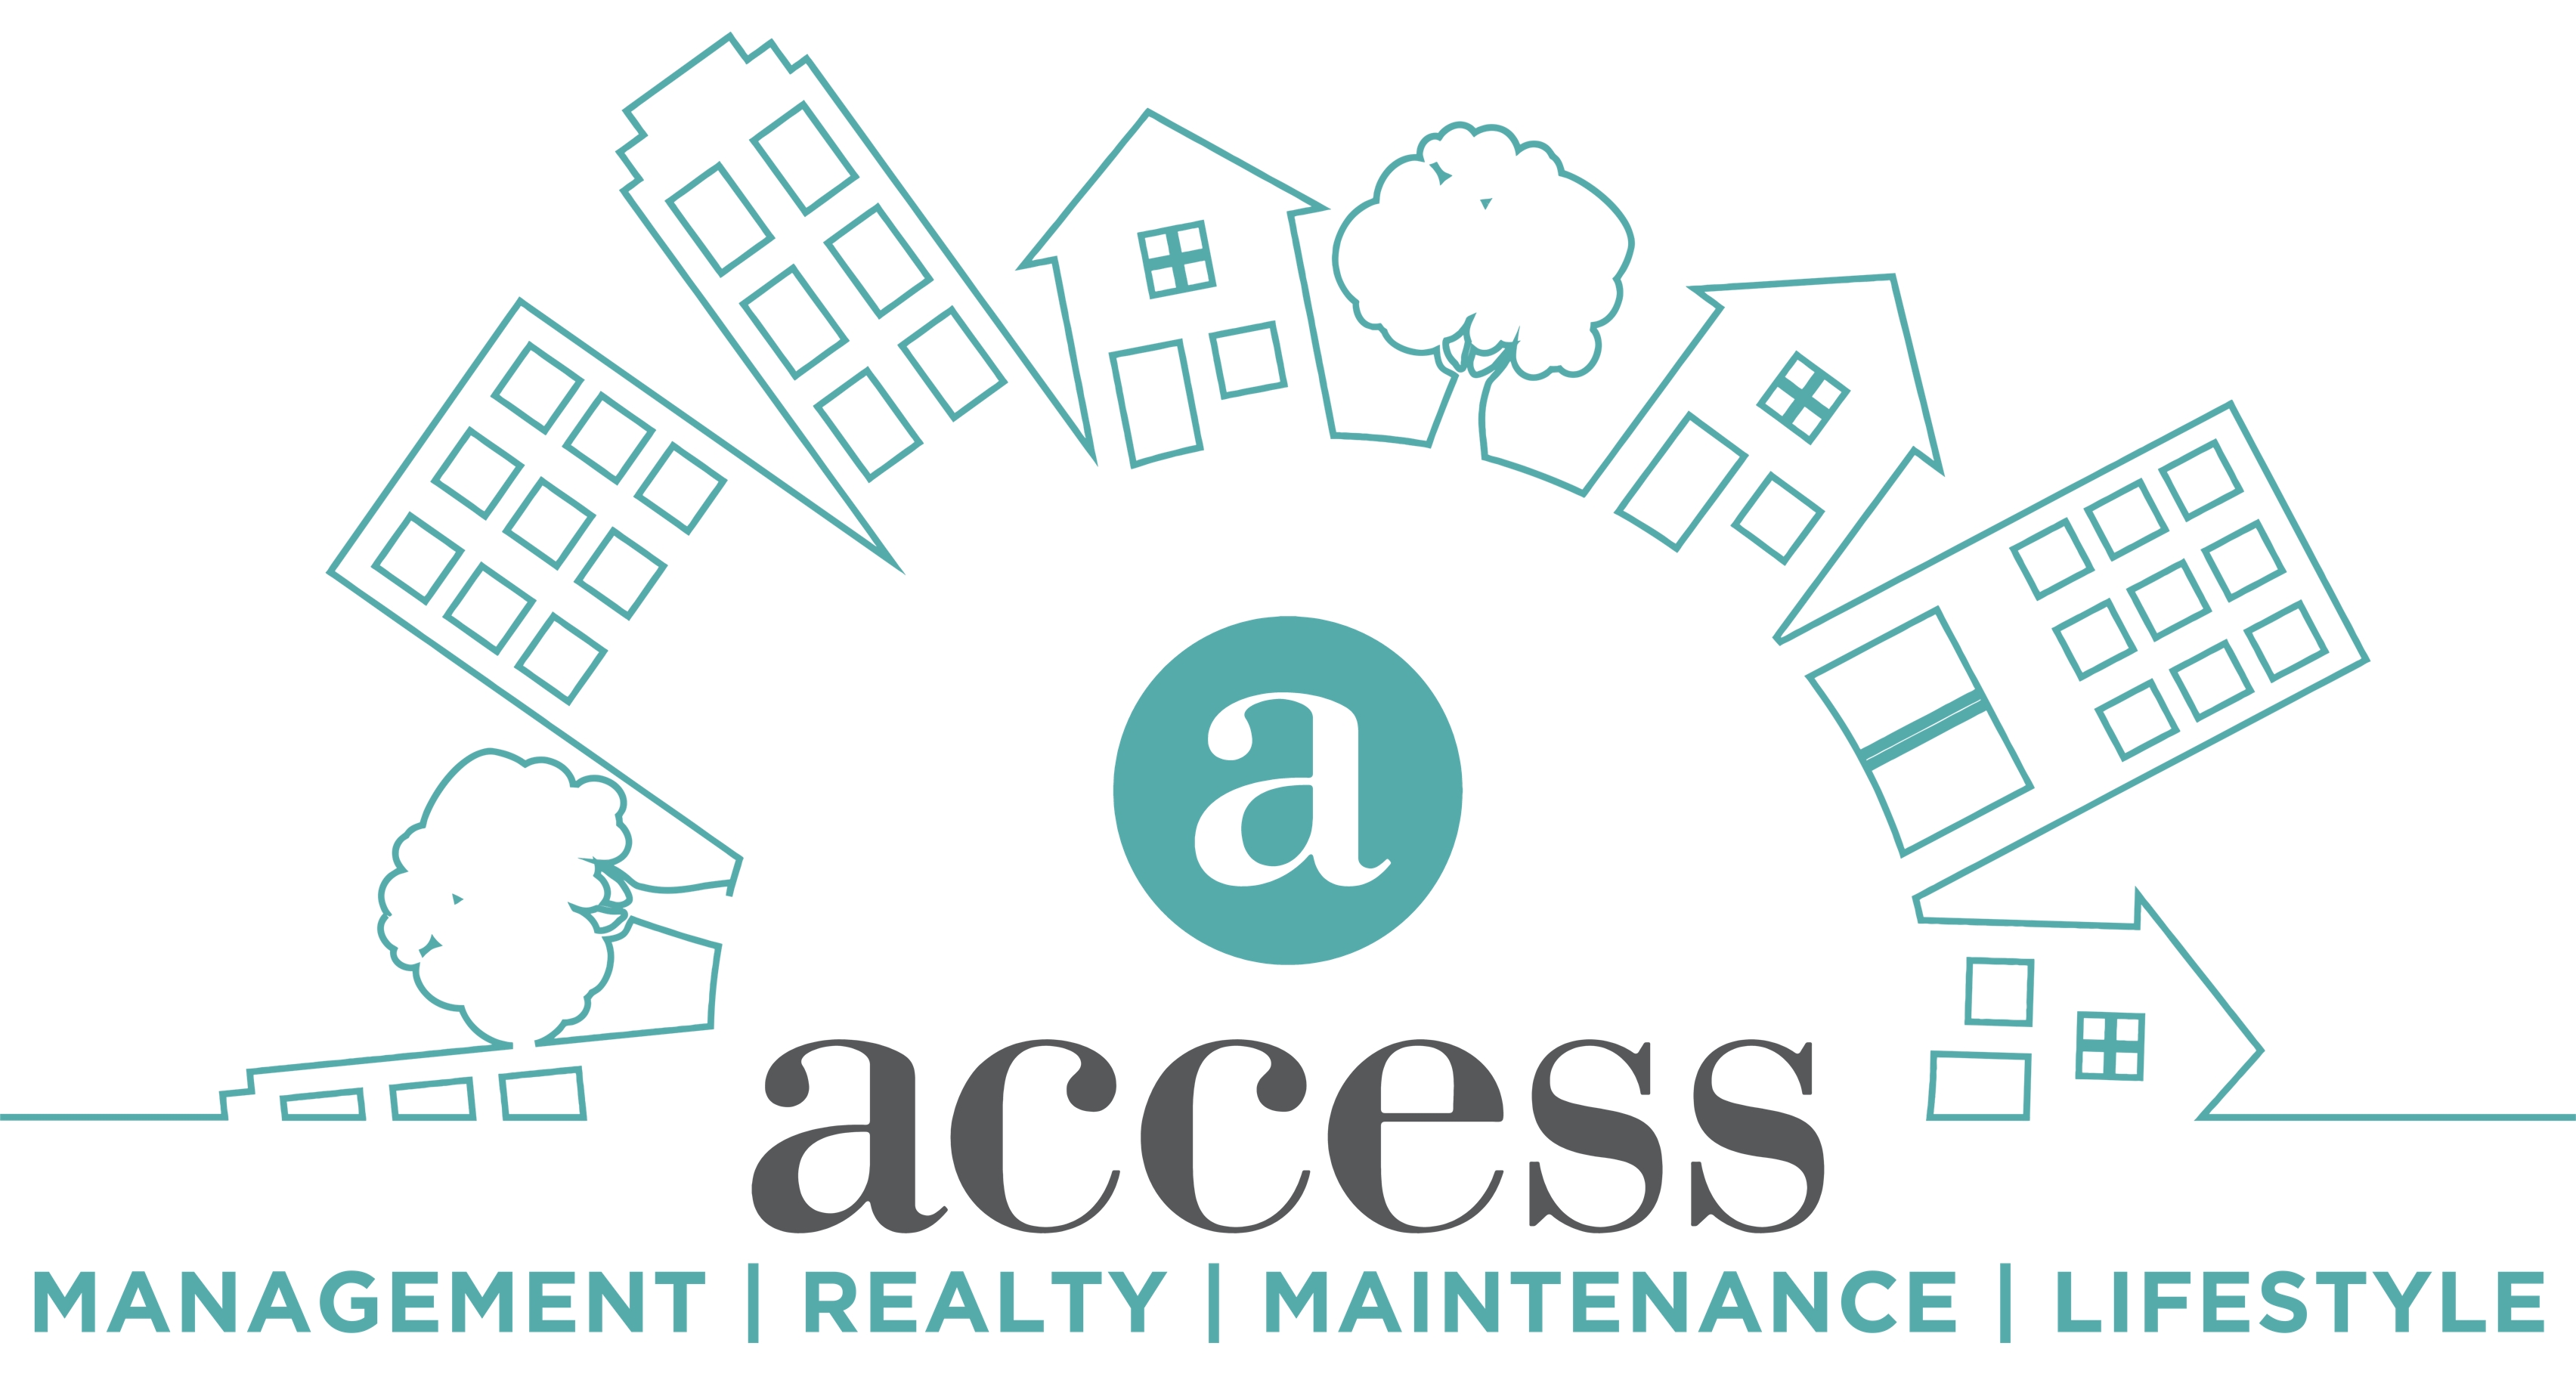 Access_All_Houses_TealGray_NoBkg.png